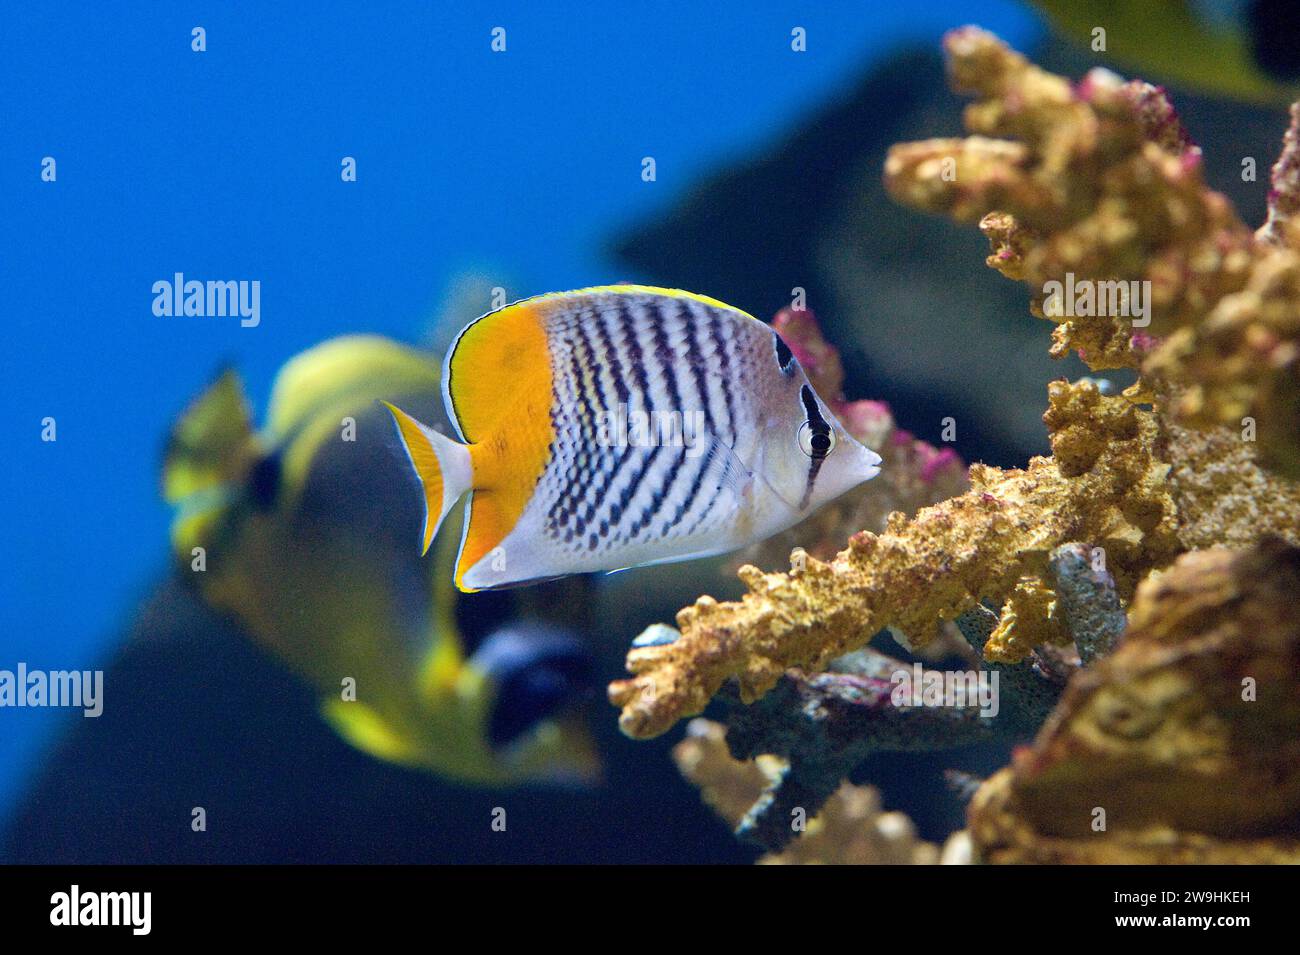 Yellowback butterflyfish (Chaetodon mertensii) is a marine fish native to tropical Pacific Ocean. Stock Photo